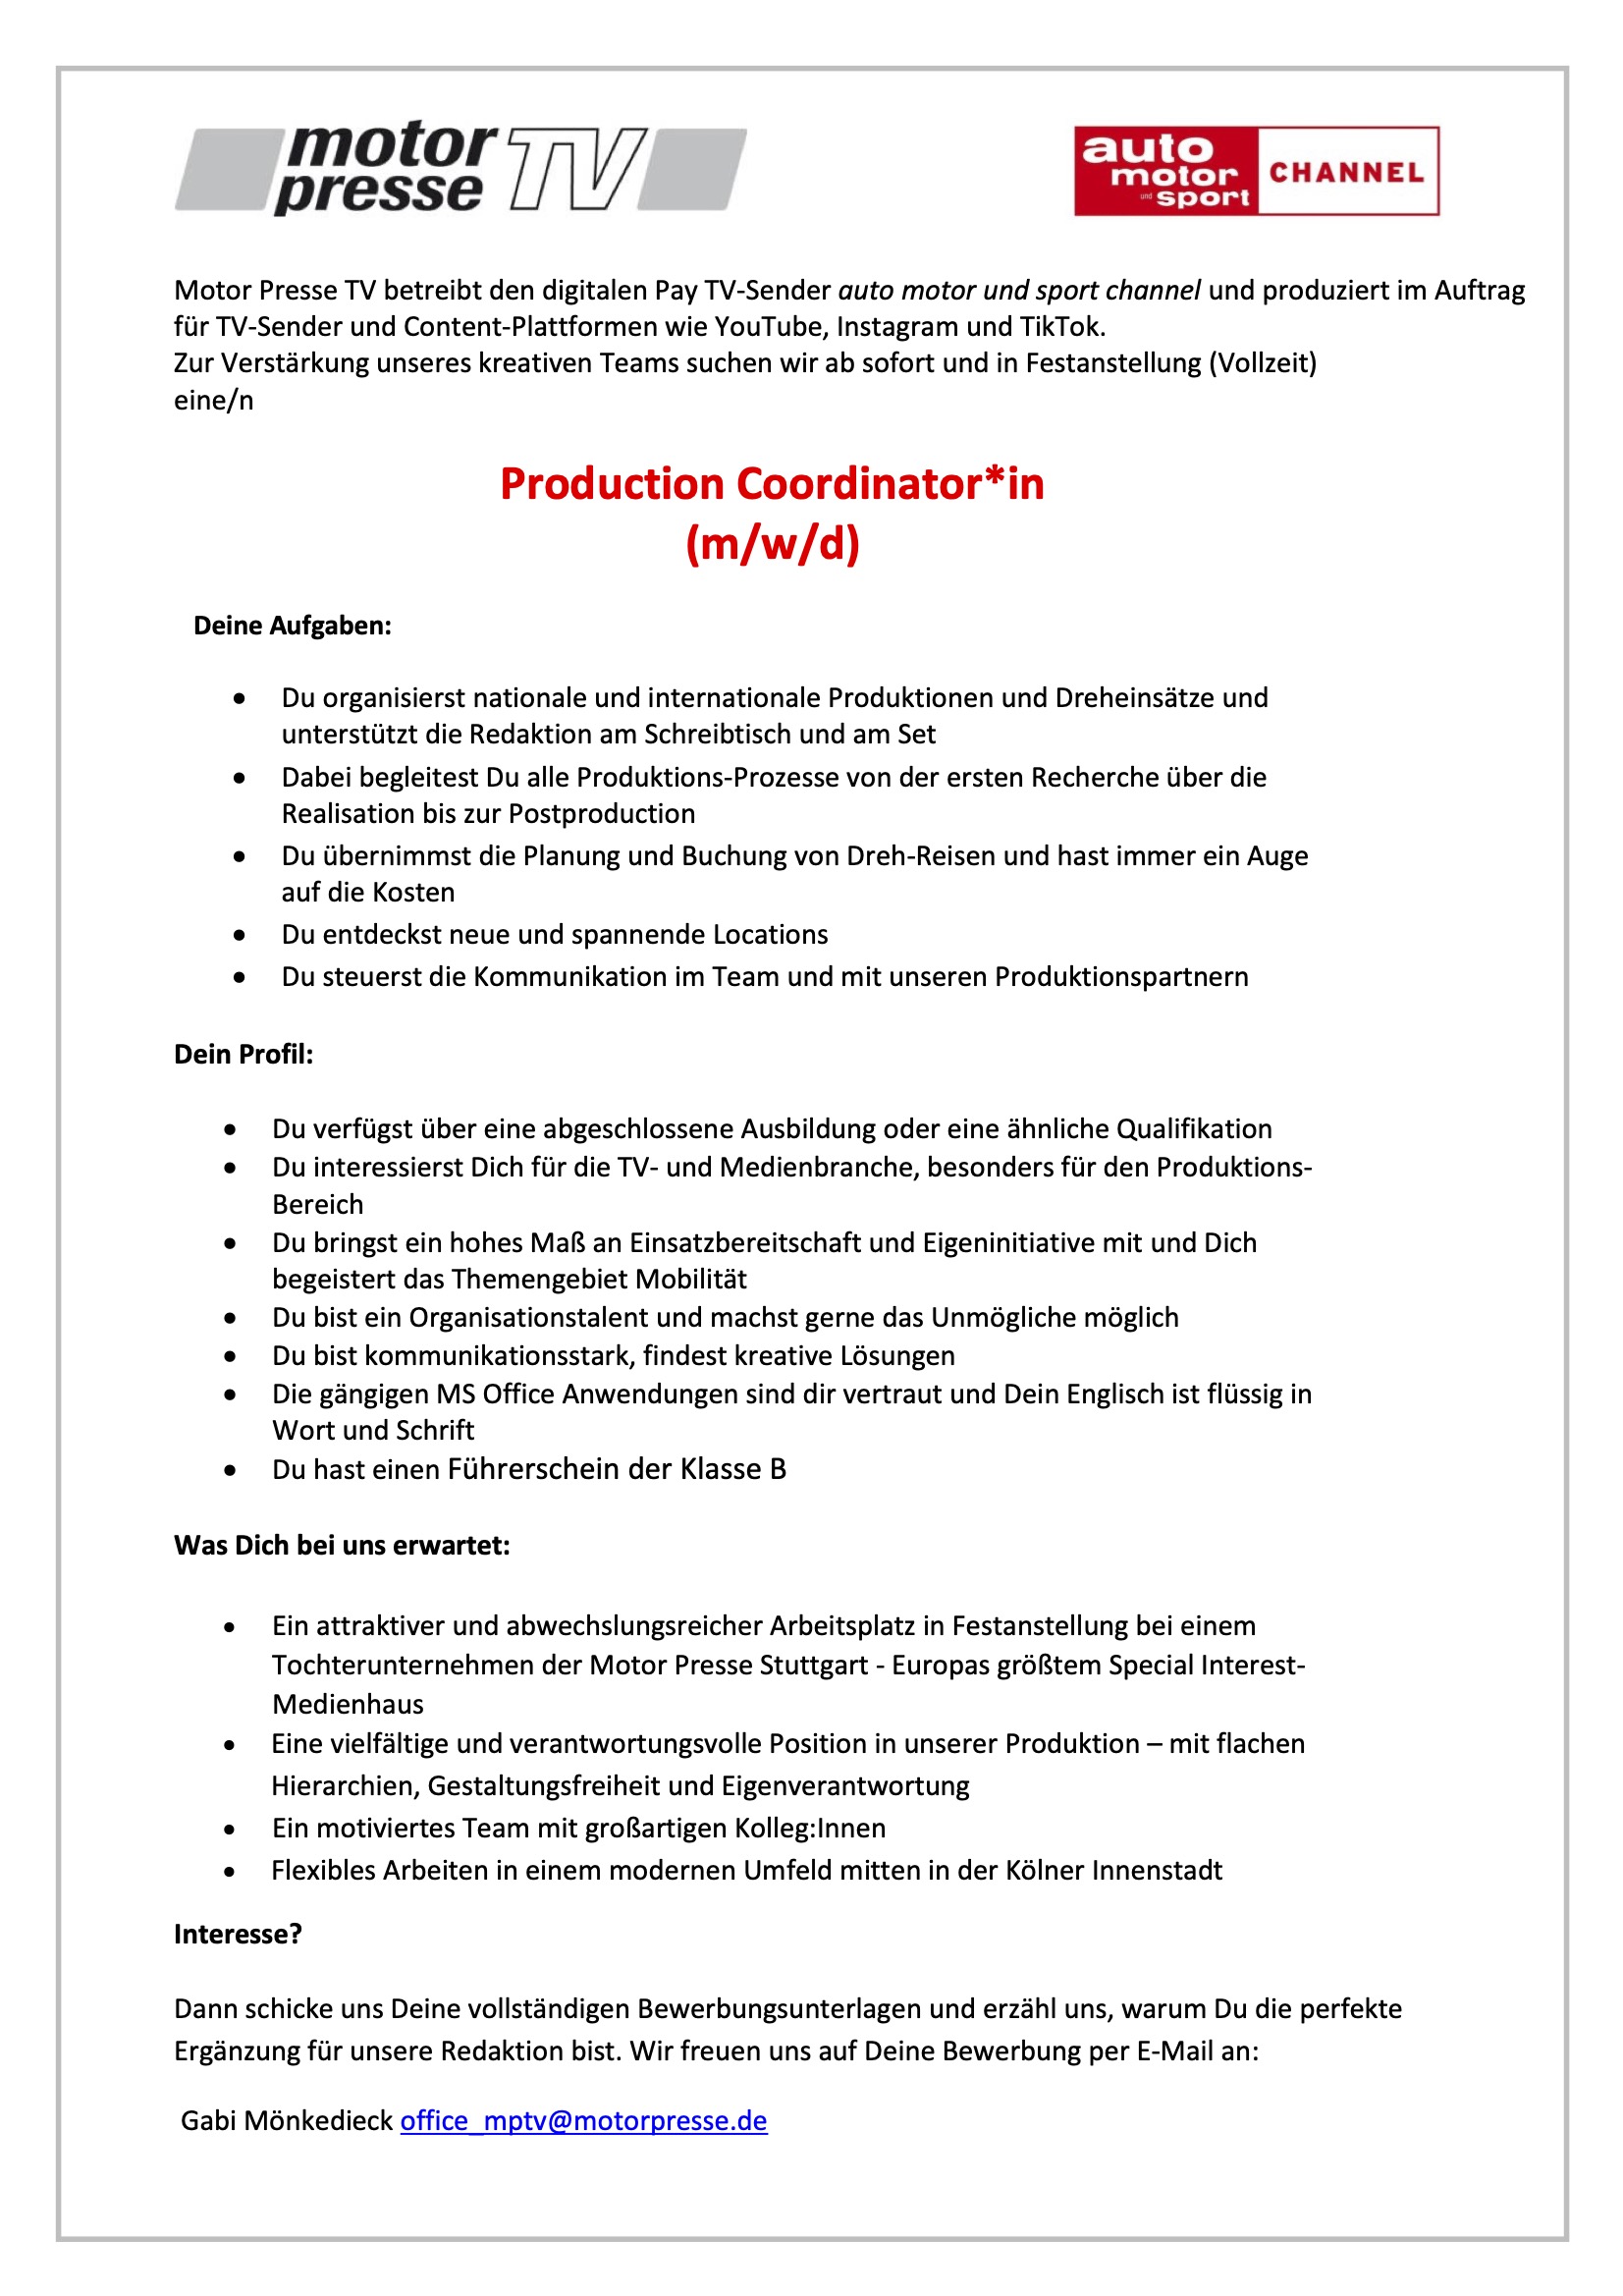 Production Coordinator*in (m/w/d)